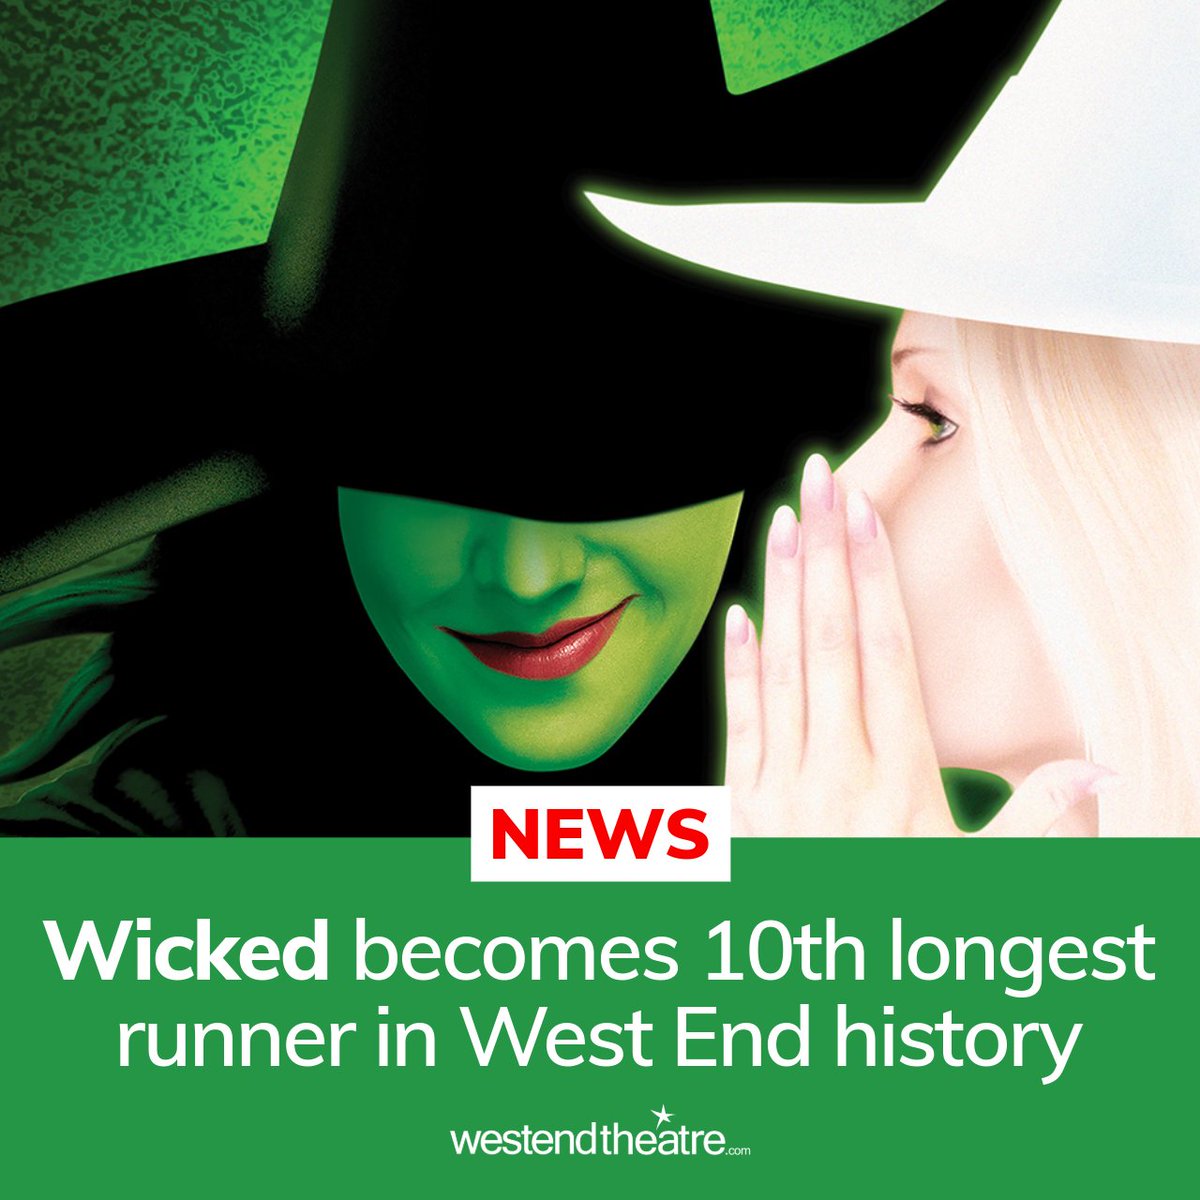 Breaking: WICKED hits West End milestone as 10th longest running West End show of all time #wicked @WickedUK Read more: westendtheatre.com/231633/